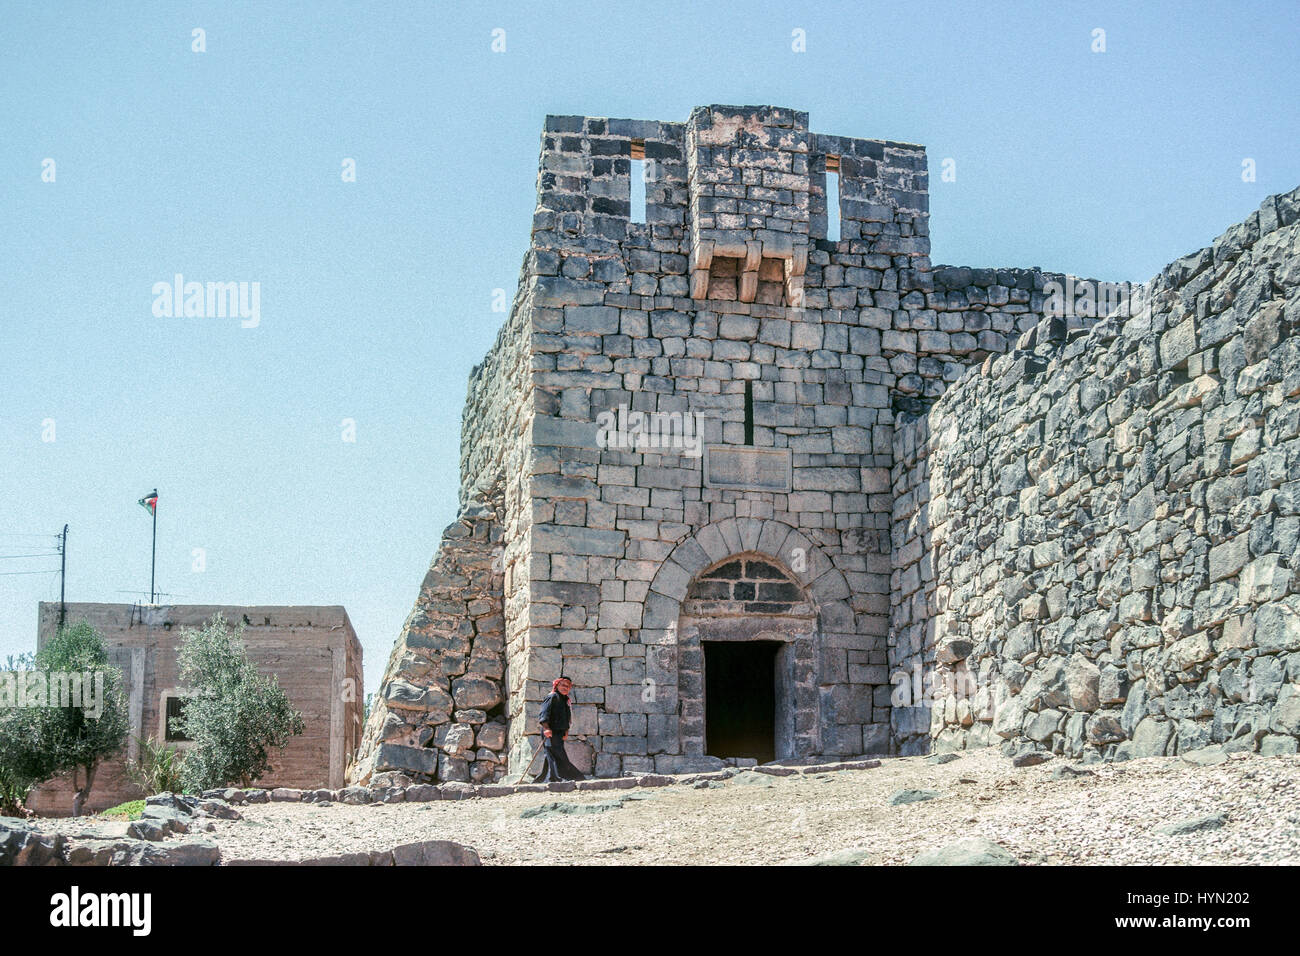 Qasr al-Azraq ('Blue Fortress') is a large fortress located in present-day eastern Jordan. It is one of the desert castles, located on the outskirts of present-day Azraq, roughly 100 km (62 mi) east of Amman. Stock Photo